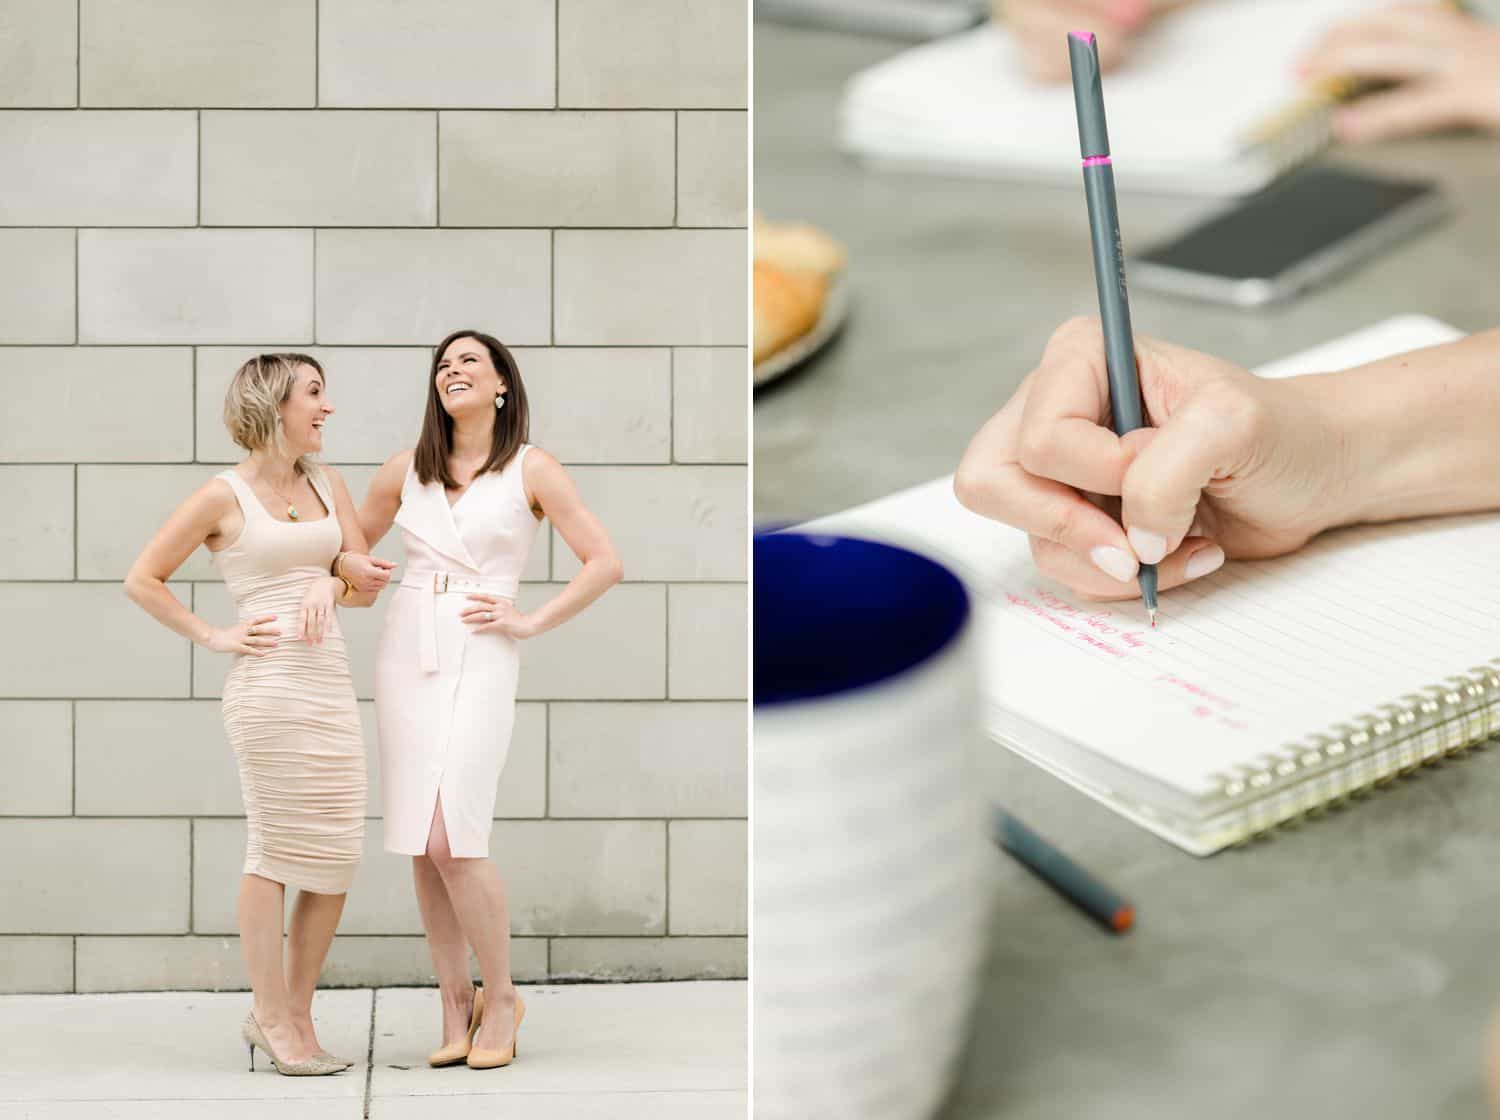 Two business women strike power poses and take notes during a meeting.